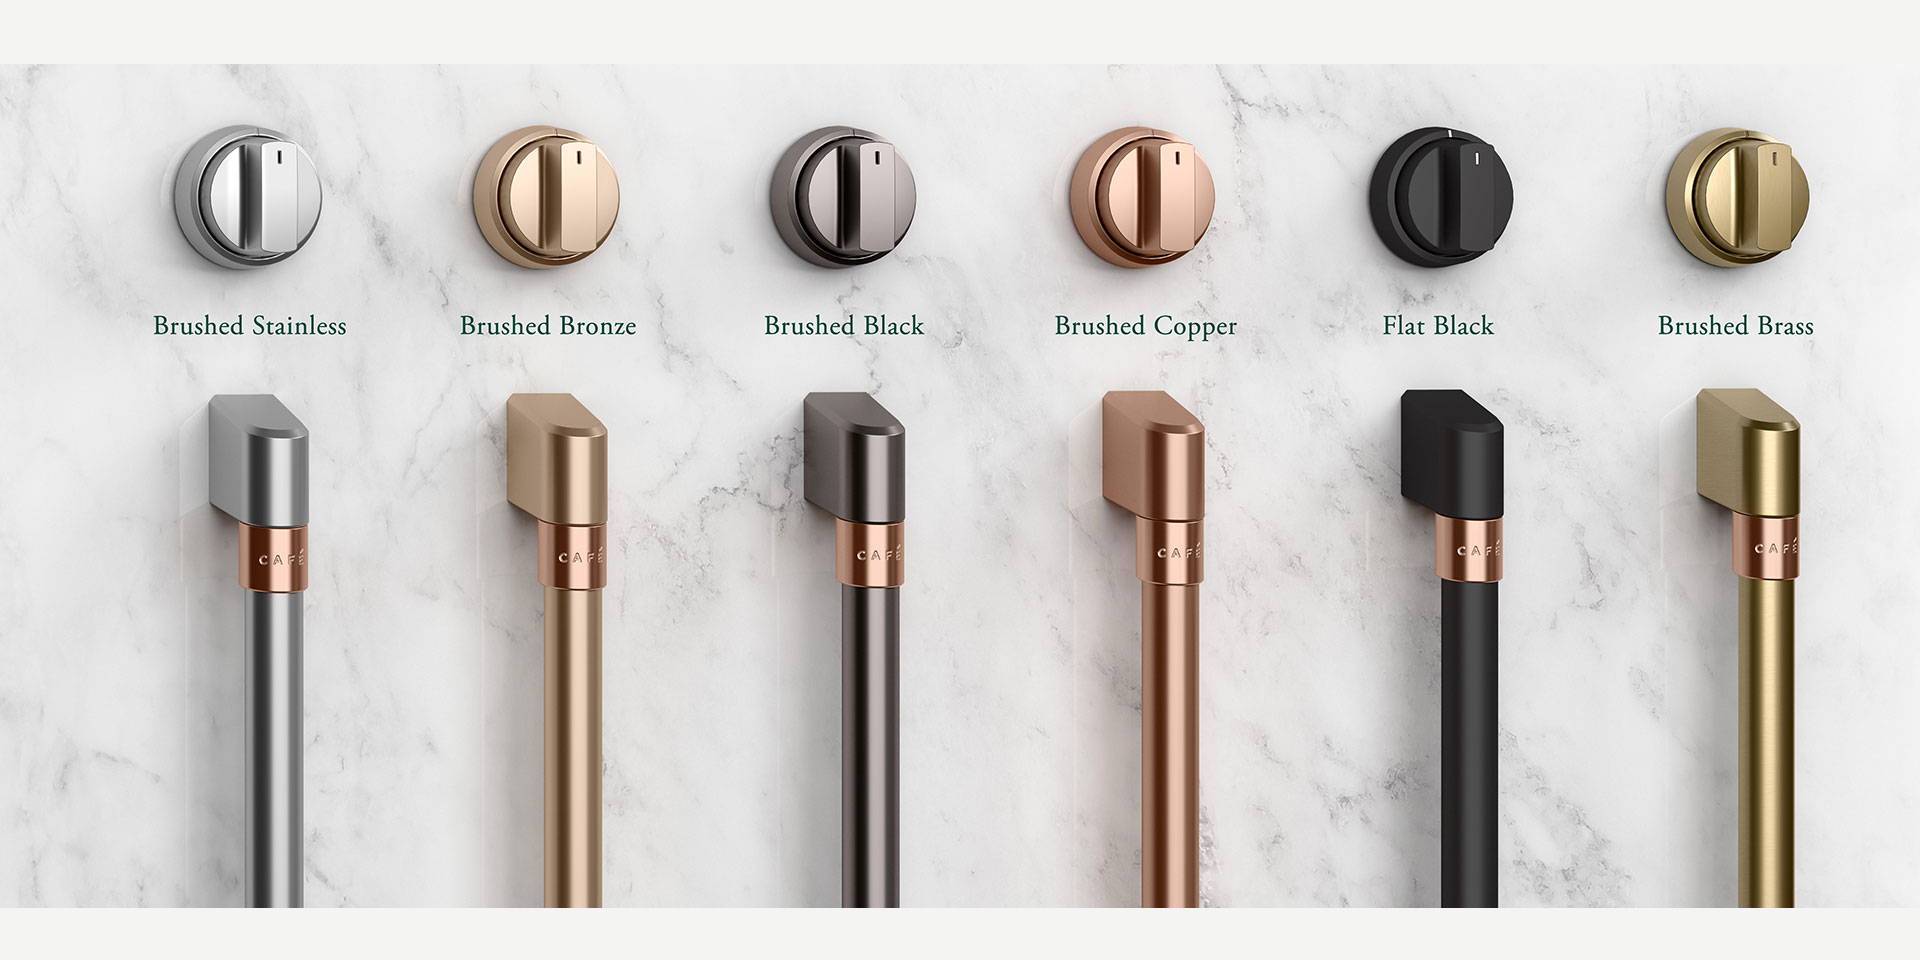 Six Cafe handles and knobs in different finishes